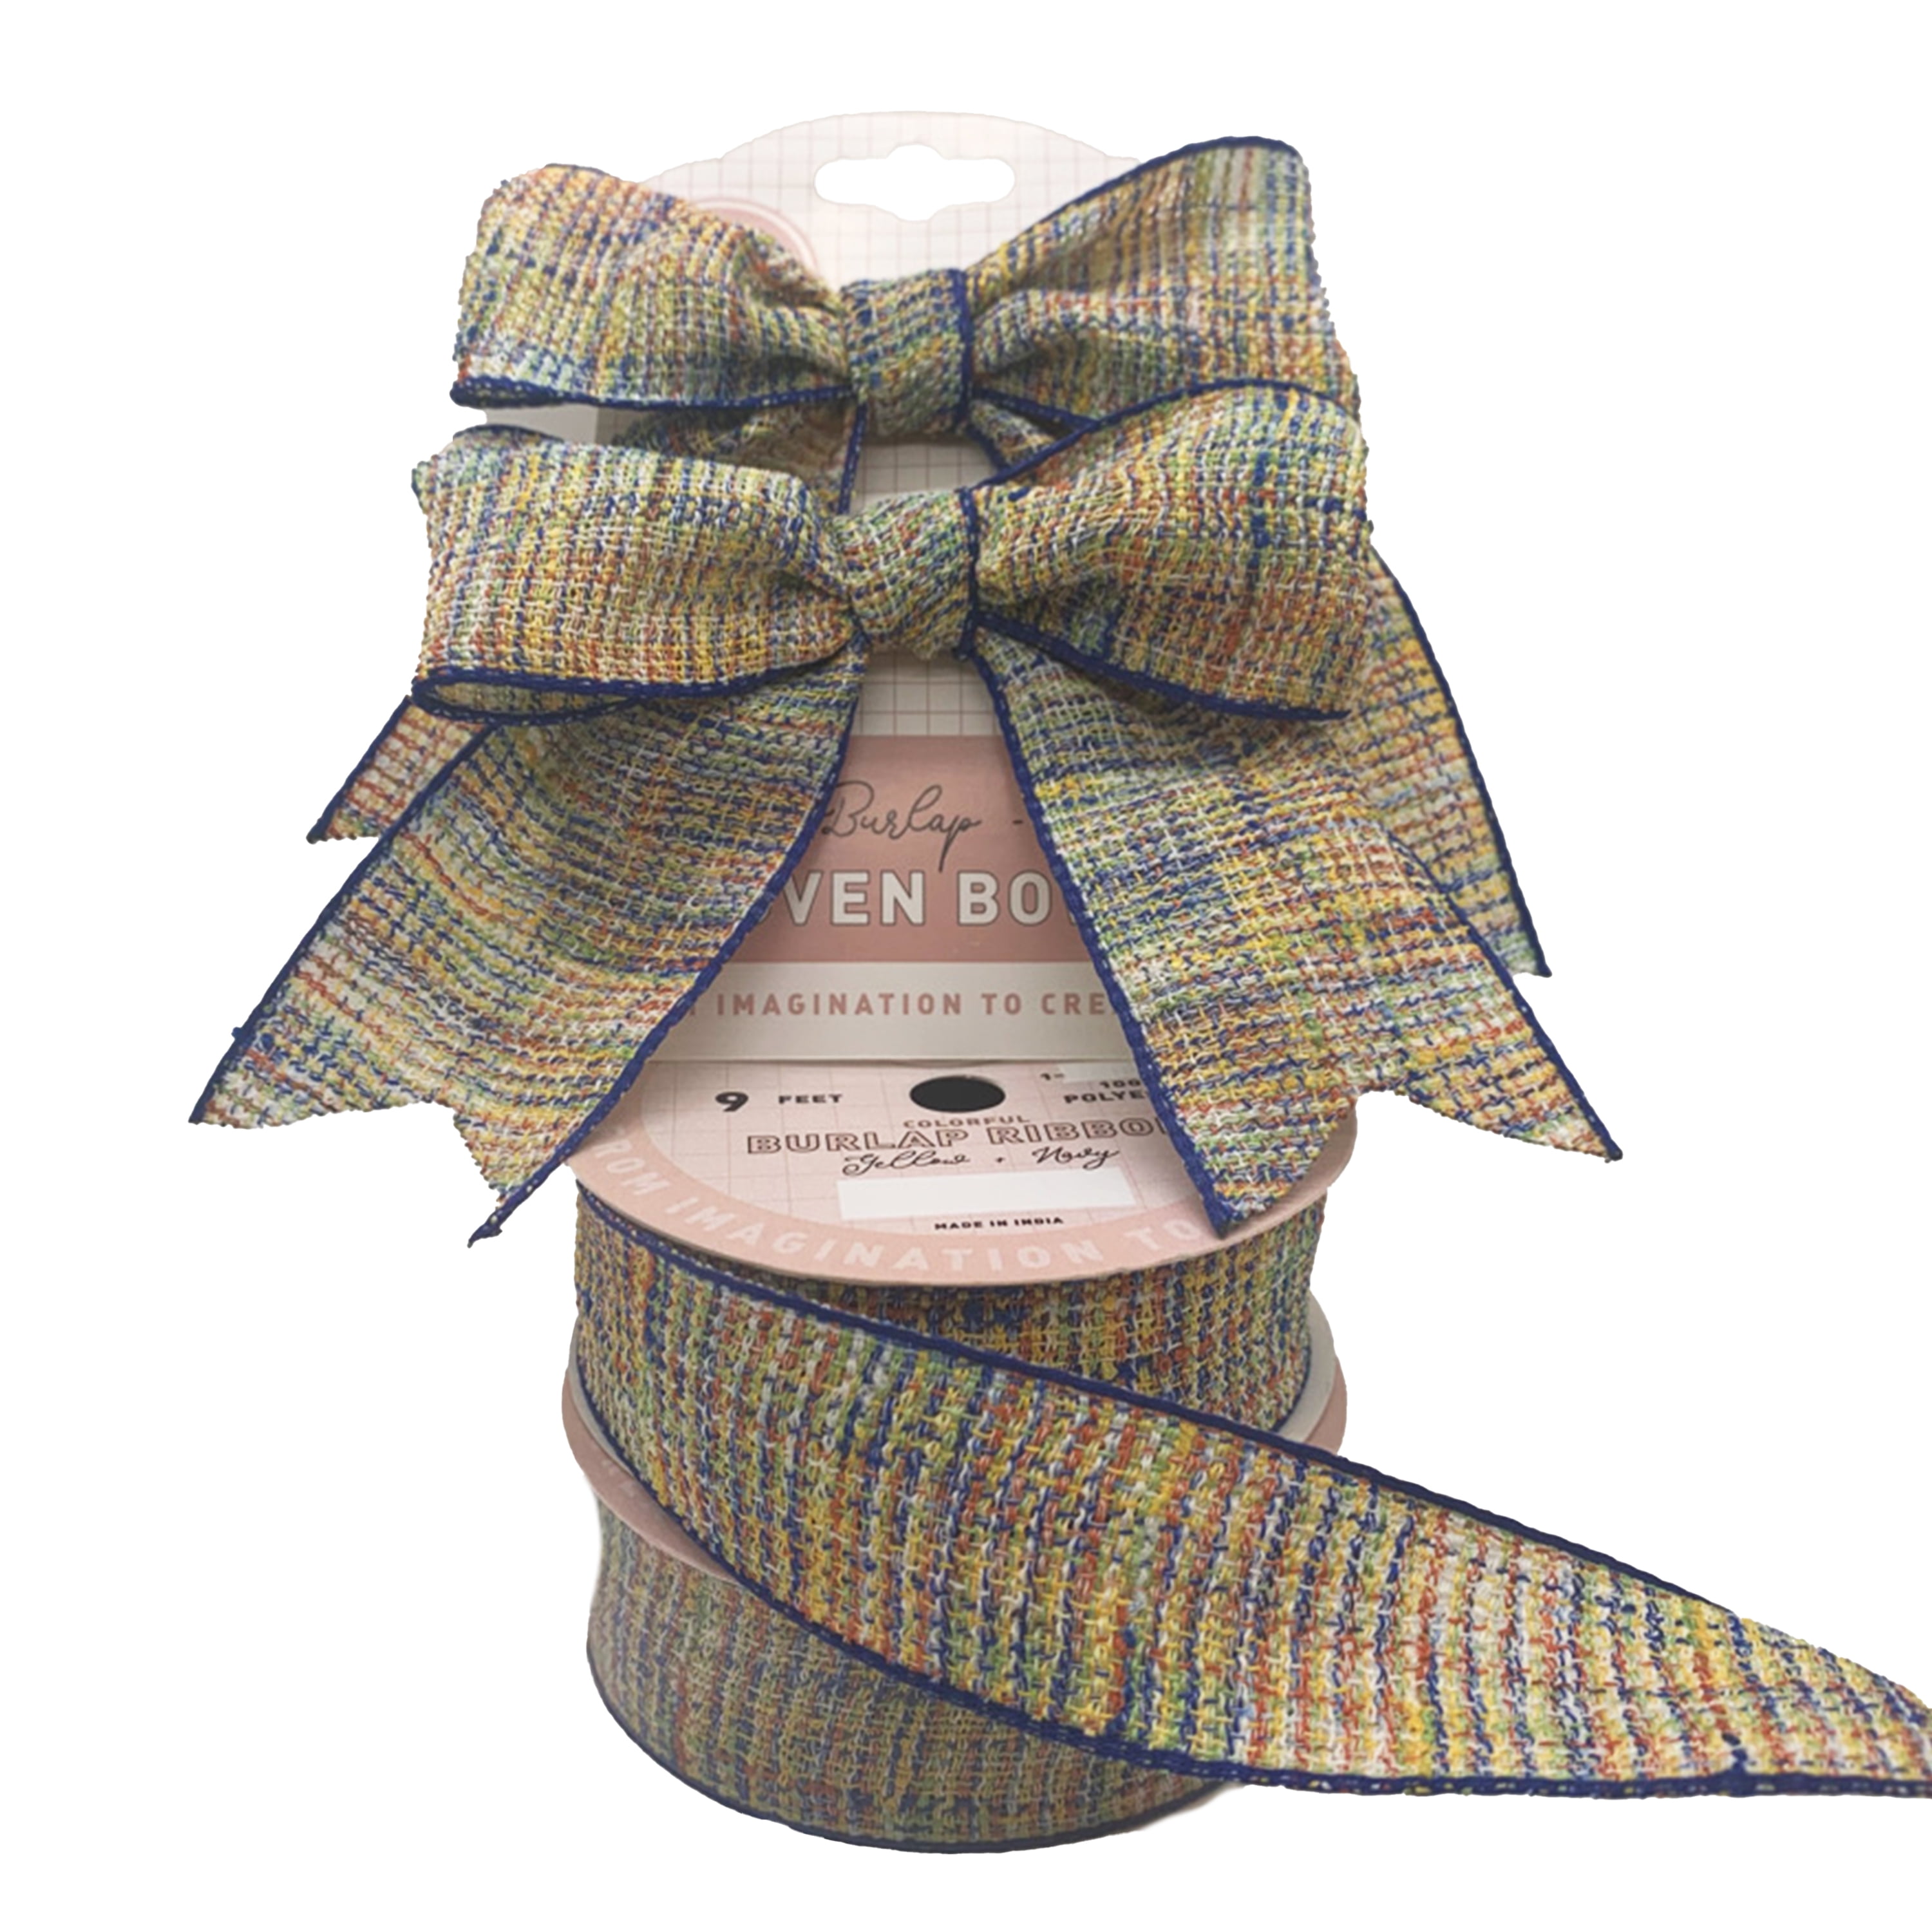 Gwen Studios Burlap Ribbon & Bows - 2 Bows 4 inch x 3 inch & 2 Spools of Ribbon 3 yds Each, Yellow & Navy Blue Plaid, Size: 4 inch x 3 inch Bow and 1